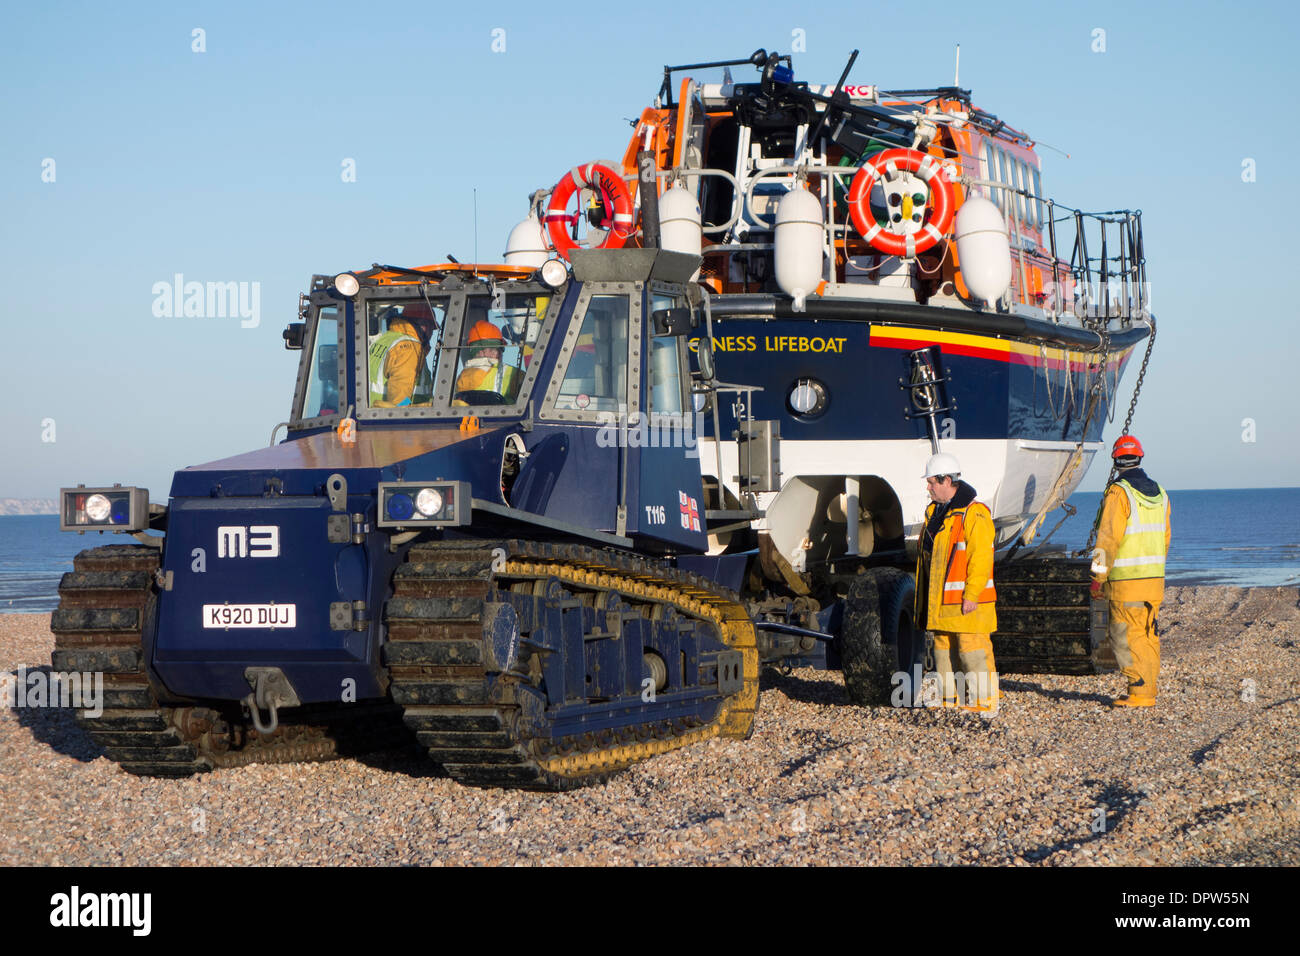 A tractor tows the 'Mersey Class' lifeboat across a shingle beach towards Dungeness RNLI lifeboat station, Kent, England Stock Photo